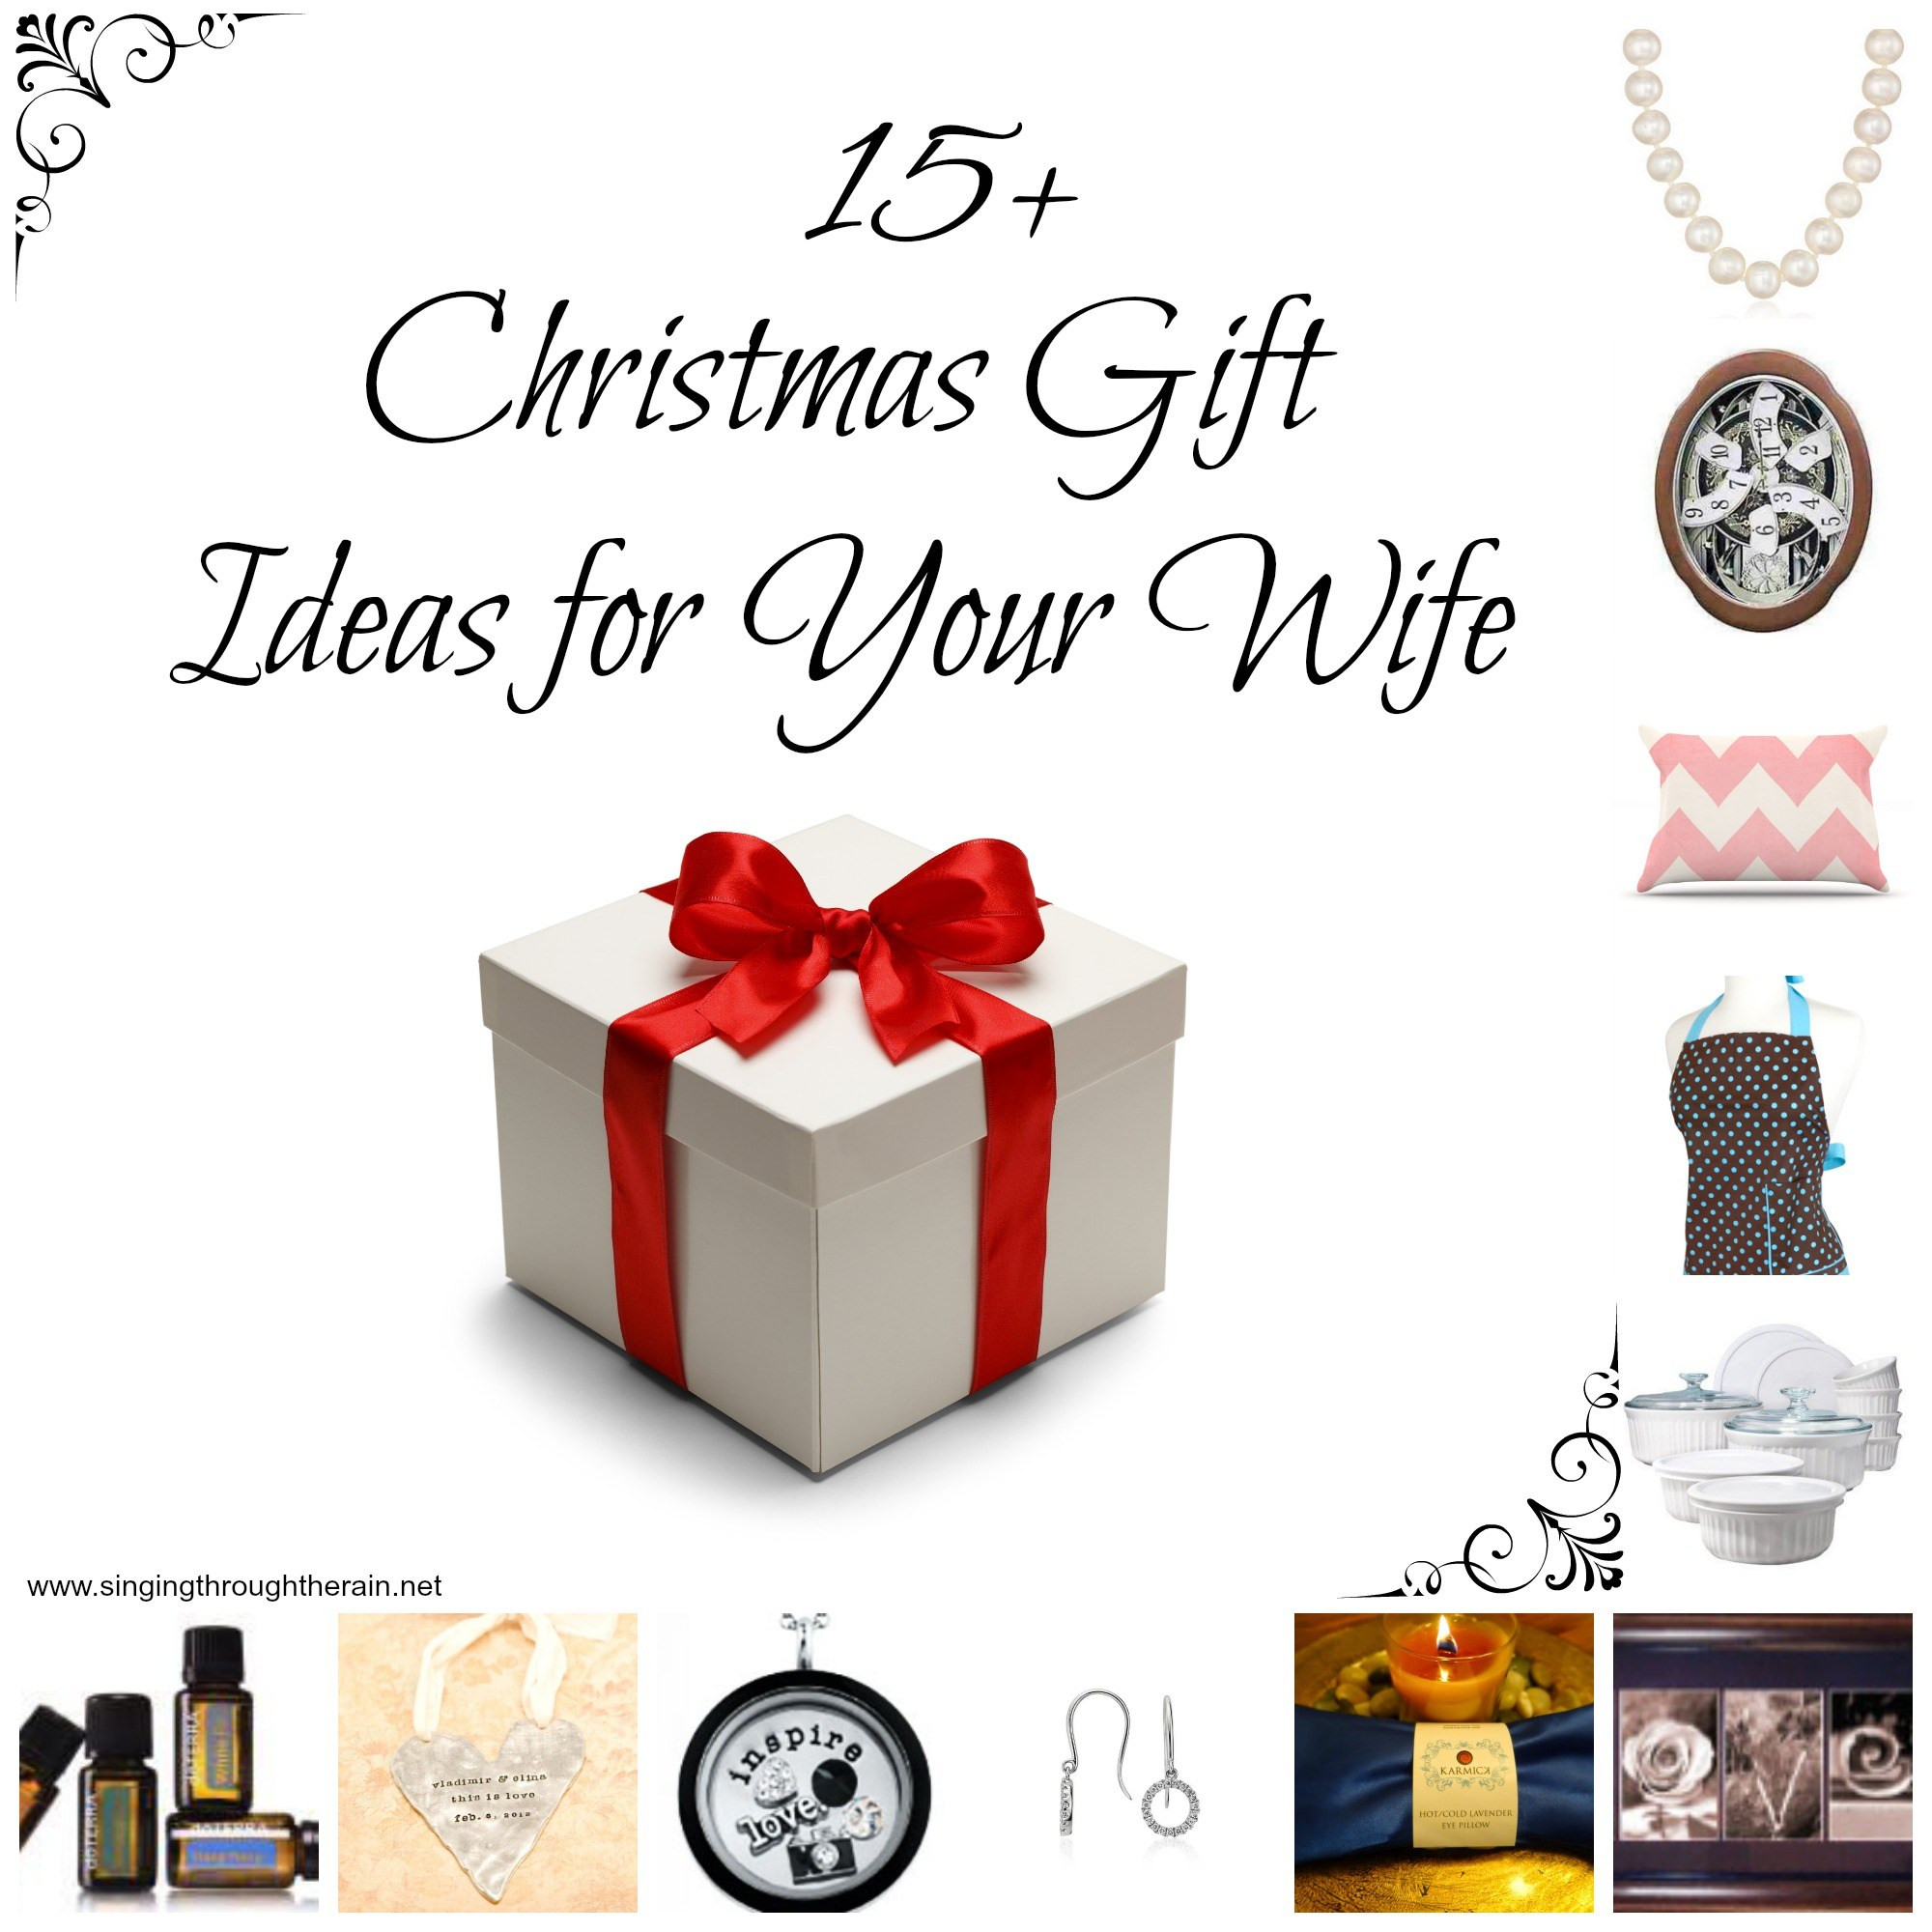 Wife Christmas Gift Ideas
 15 Christmas Gift Ideas for Your Wife